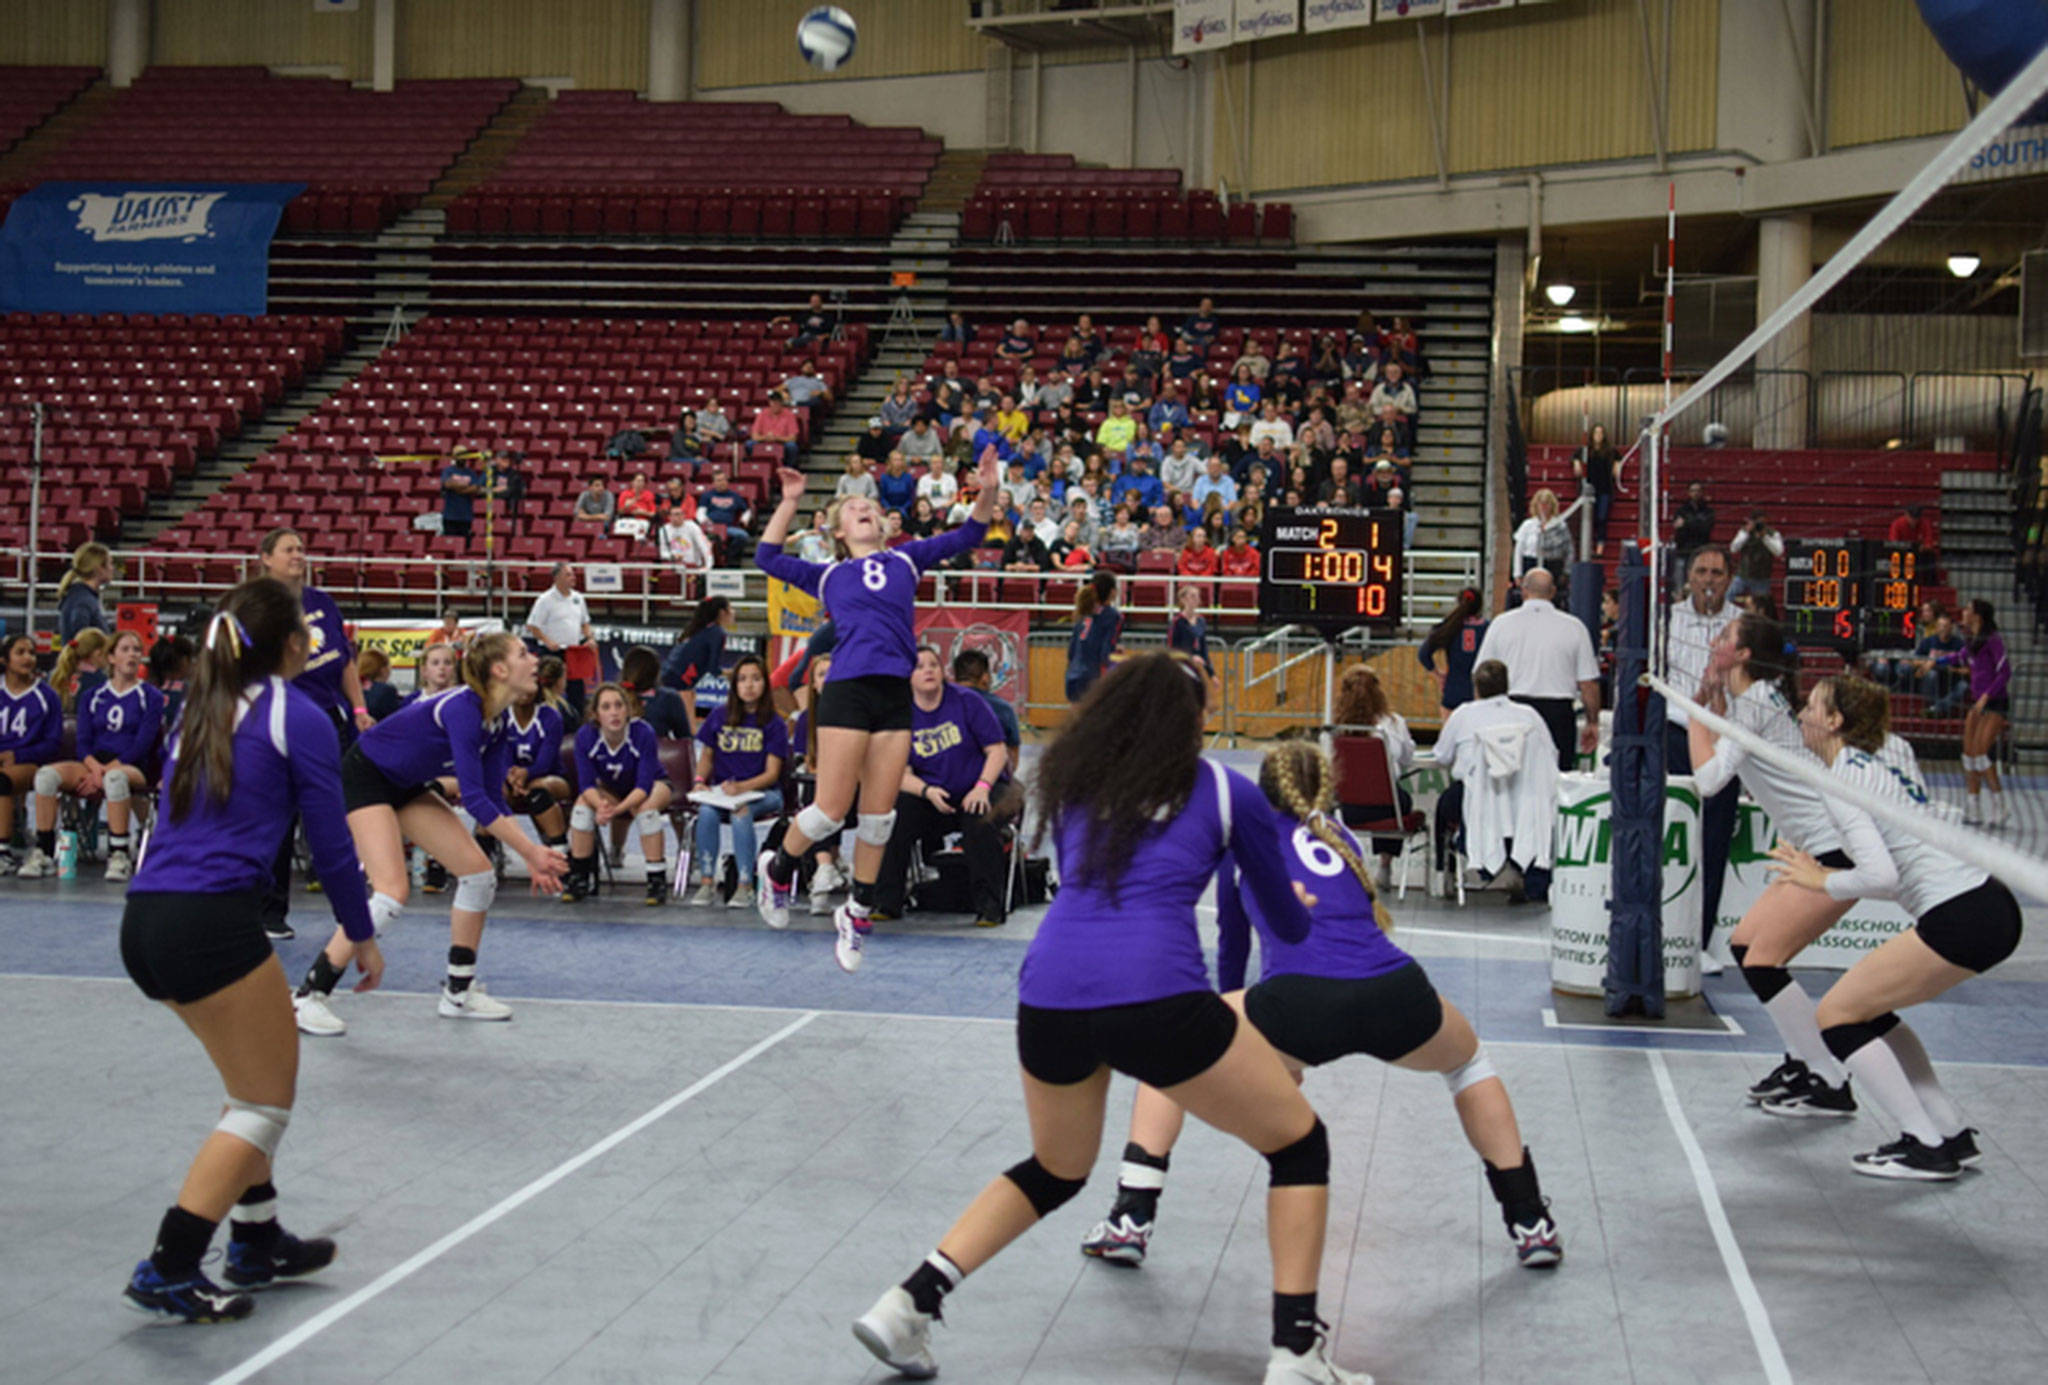 Cami Bristow rises for a kill against Mountain View in the state tournament. (Photo by Steve Bristow)